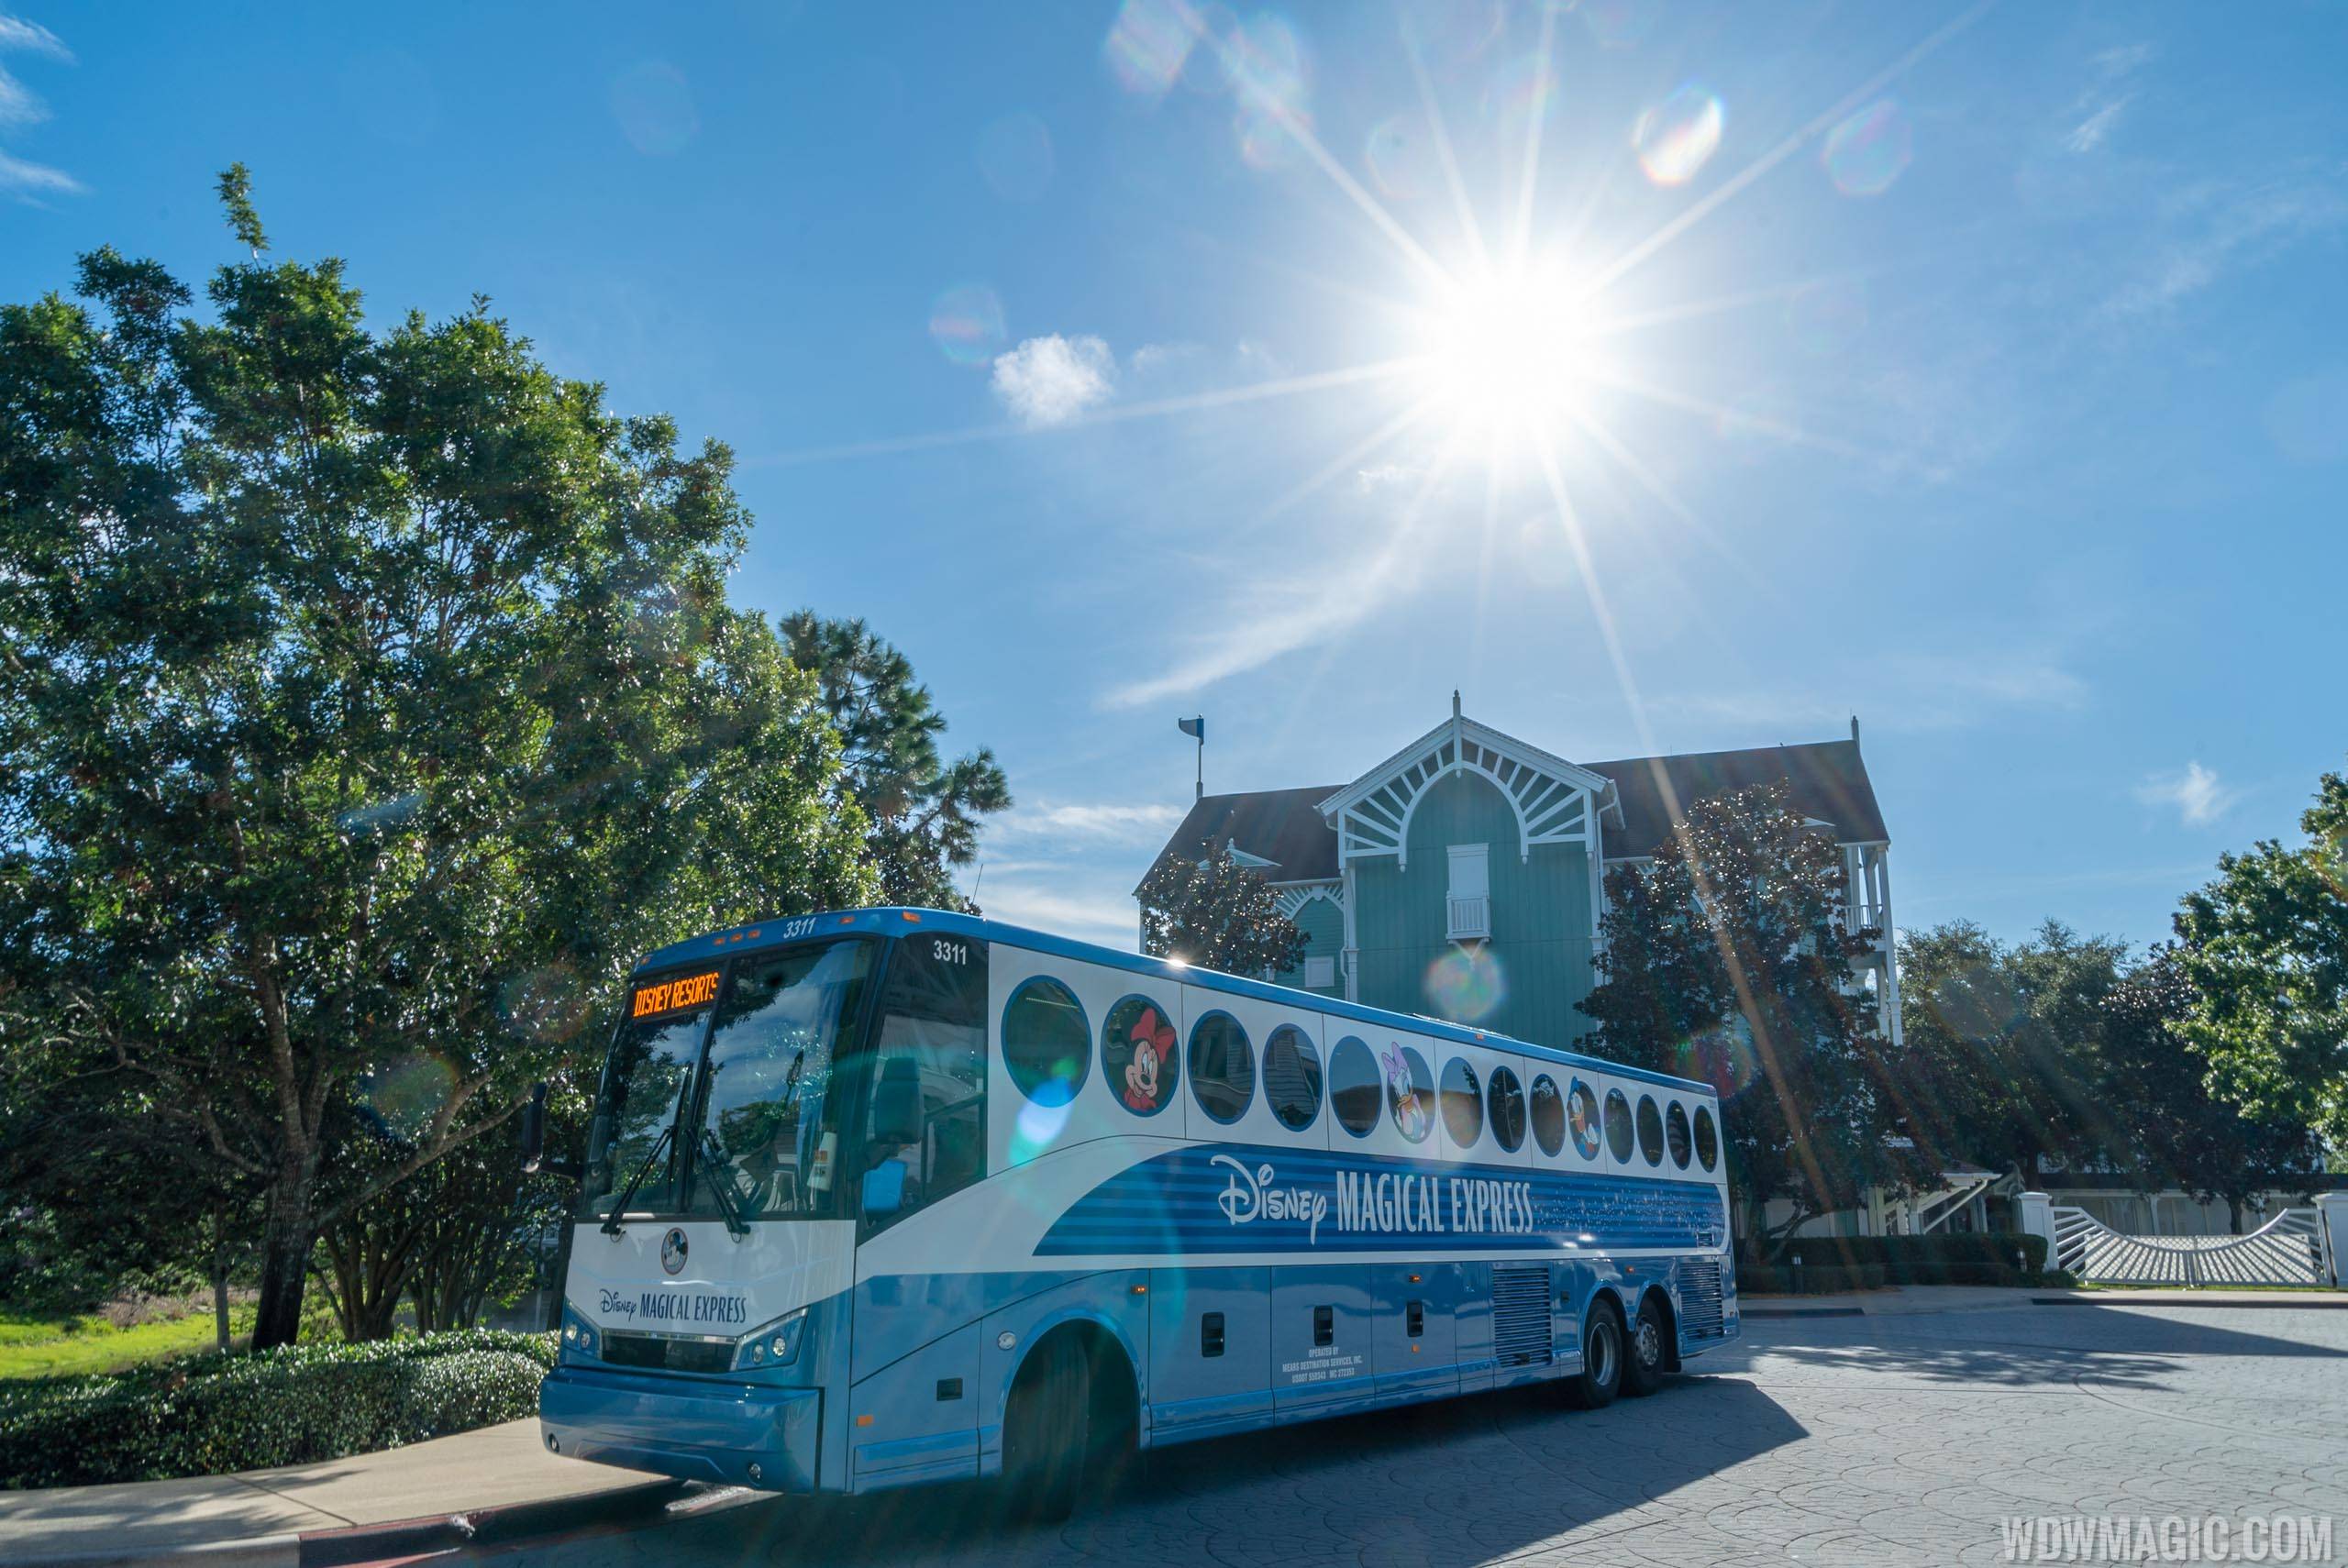 Mears operated Disney's Magical Express for 15 years